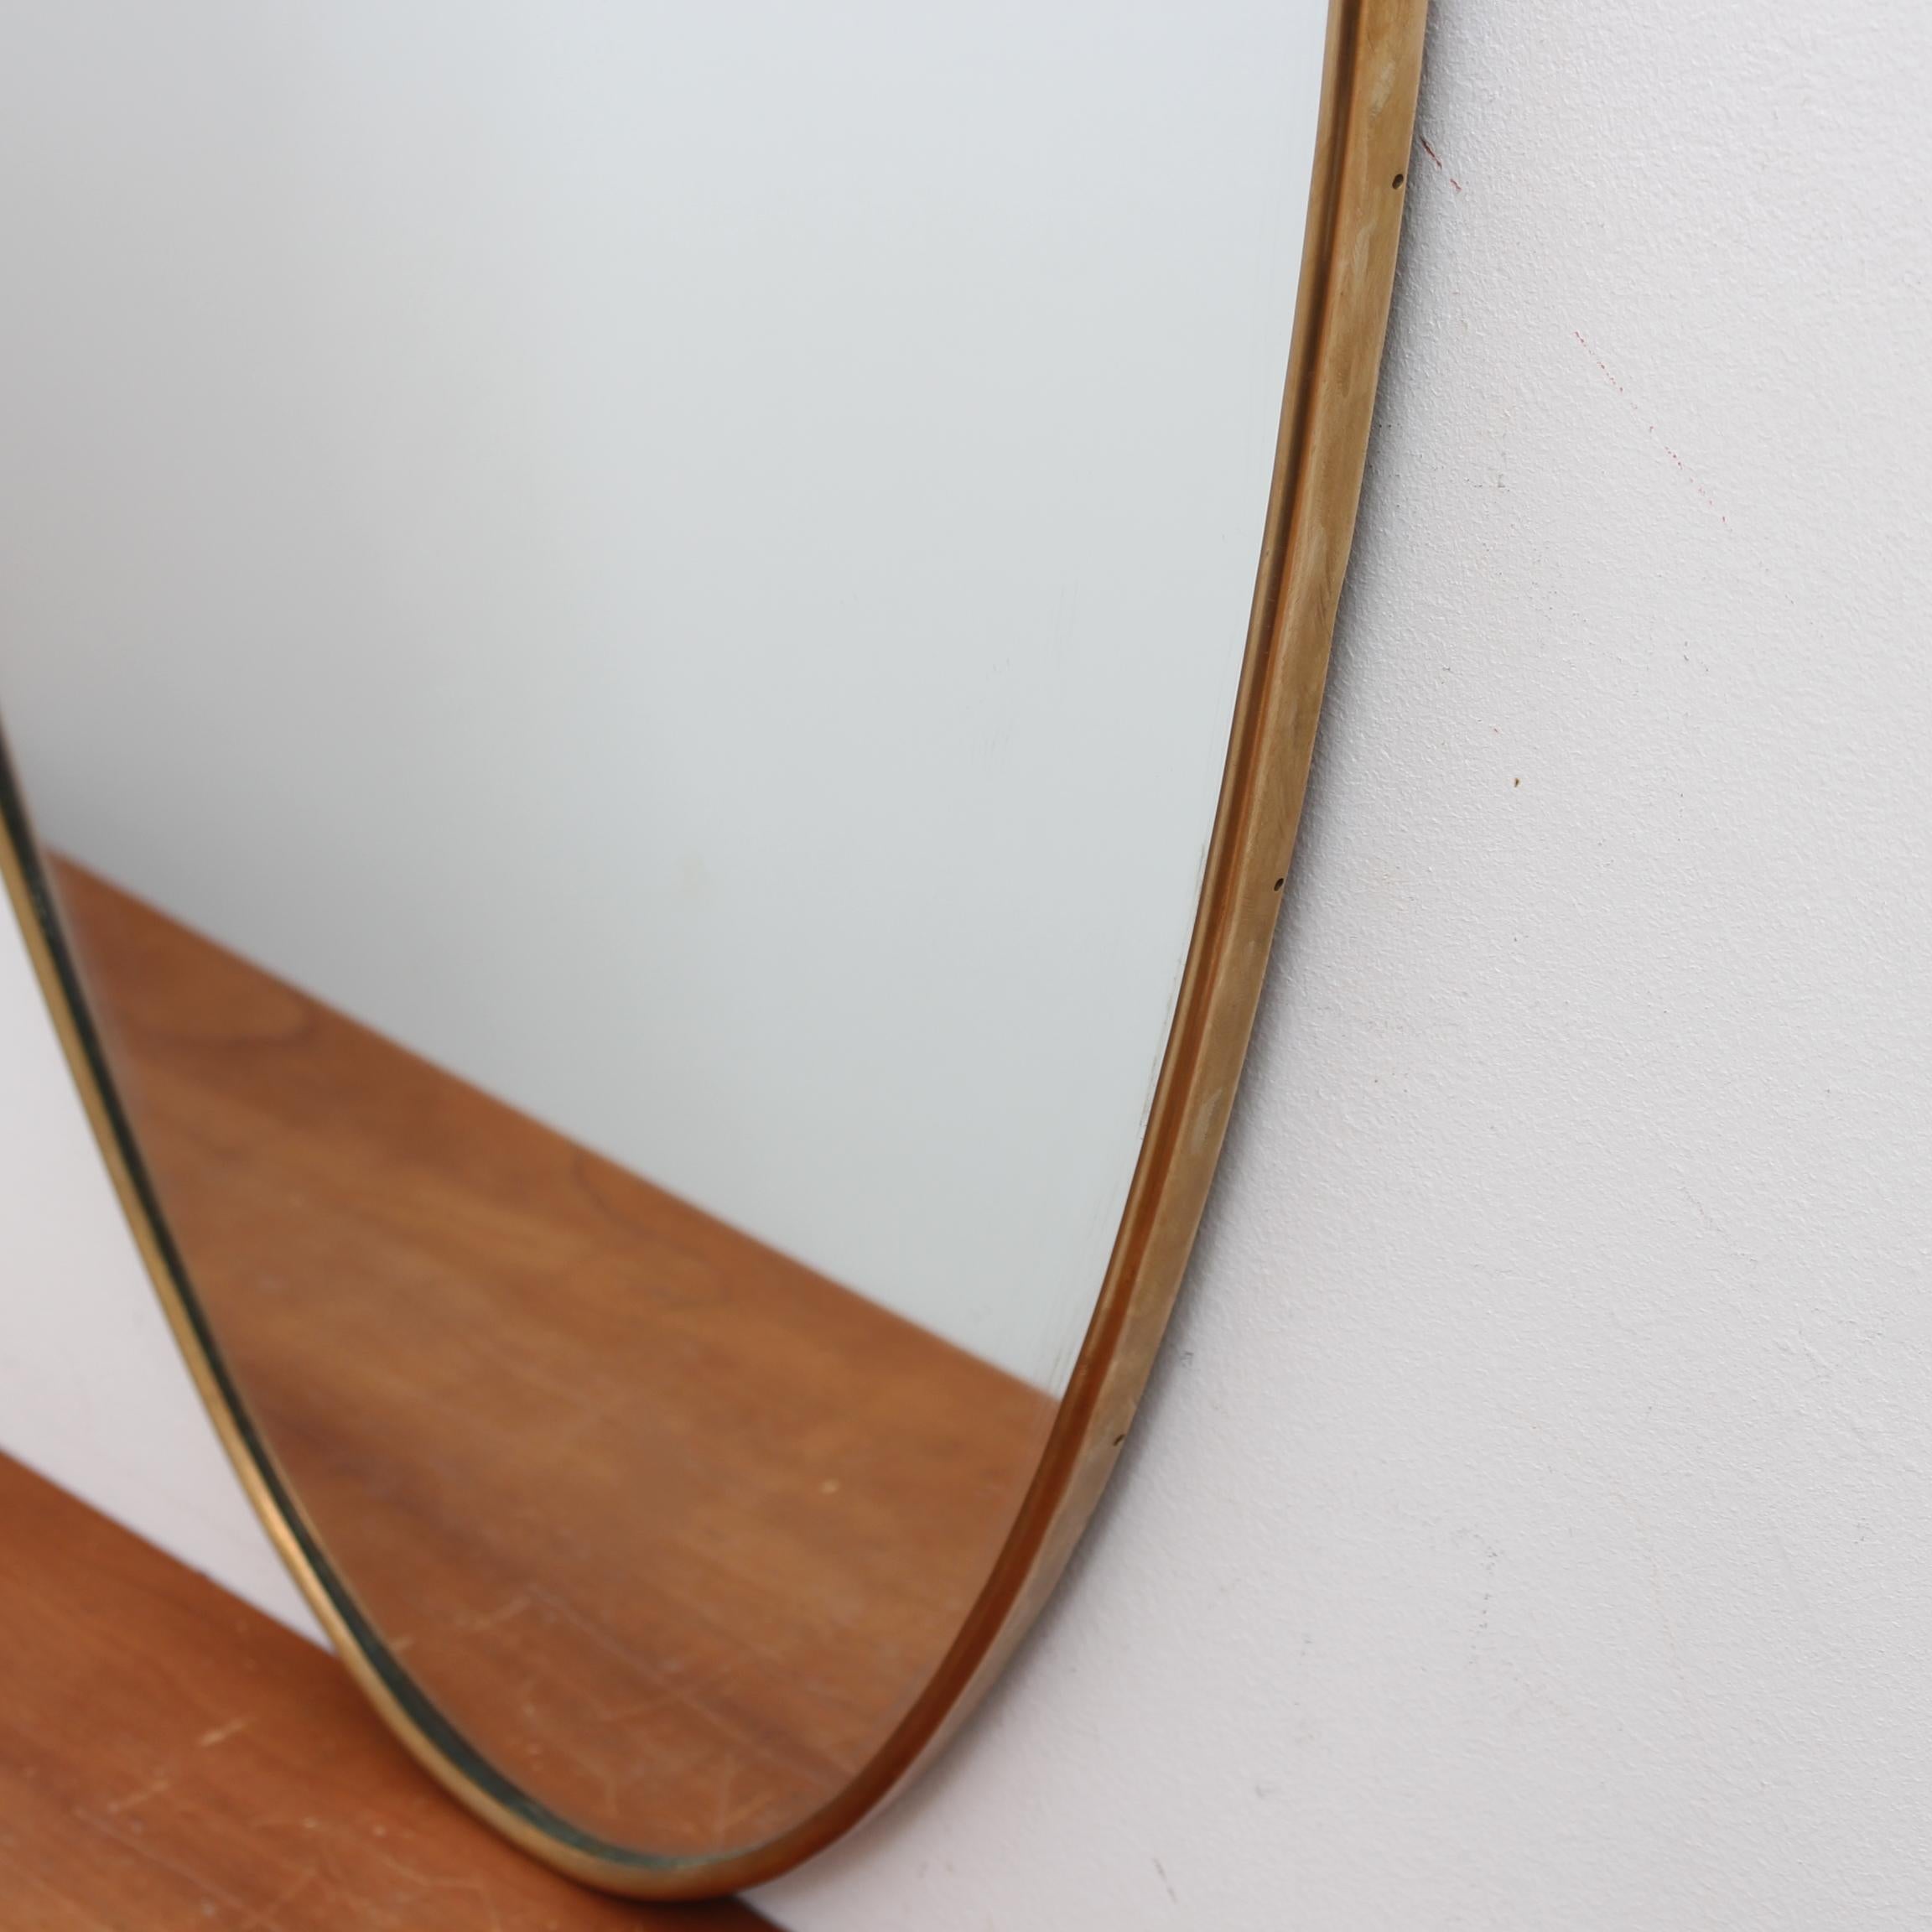 Vintage Italian Wall Mirror with Brass Frame (circa 1960s) For Sale 5